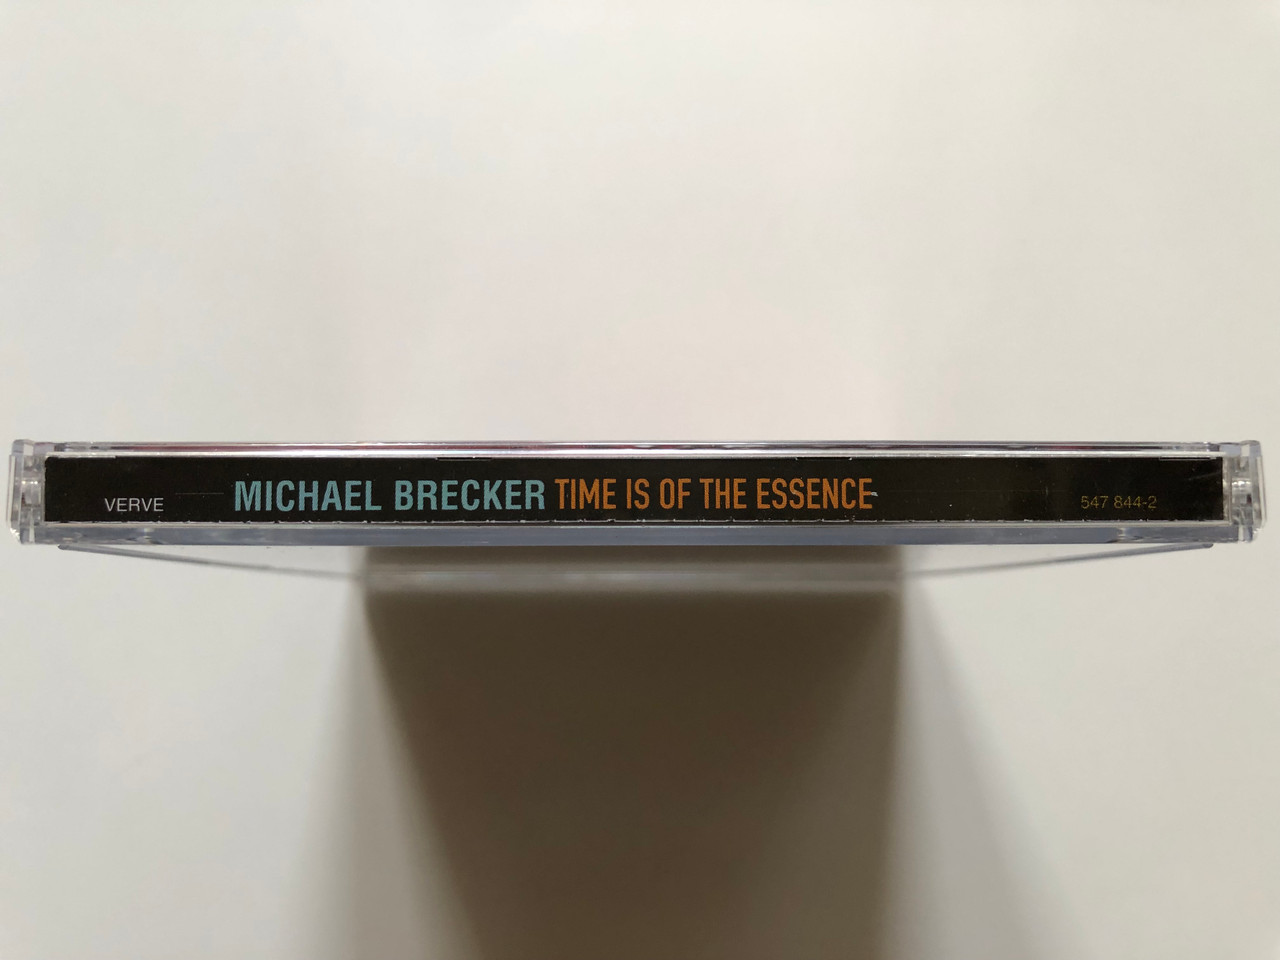 https://cdn10.bigcommerce.com/s-62bdpkt7pb/products/0/images/313326/Michael_Brecker_Time_Is_Of_The_Essence_Verve_Records_Audio_CD_1999_547_844-2_3__60813.1700671315.1280.1280.JPG?c=2